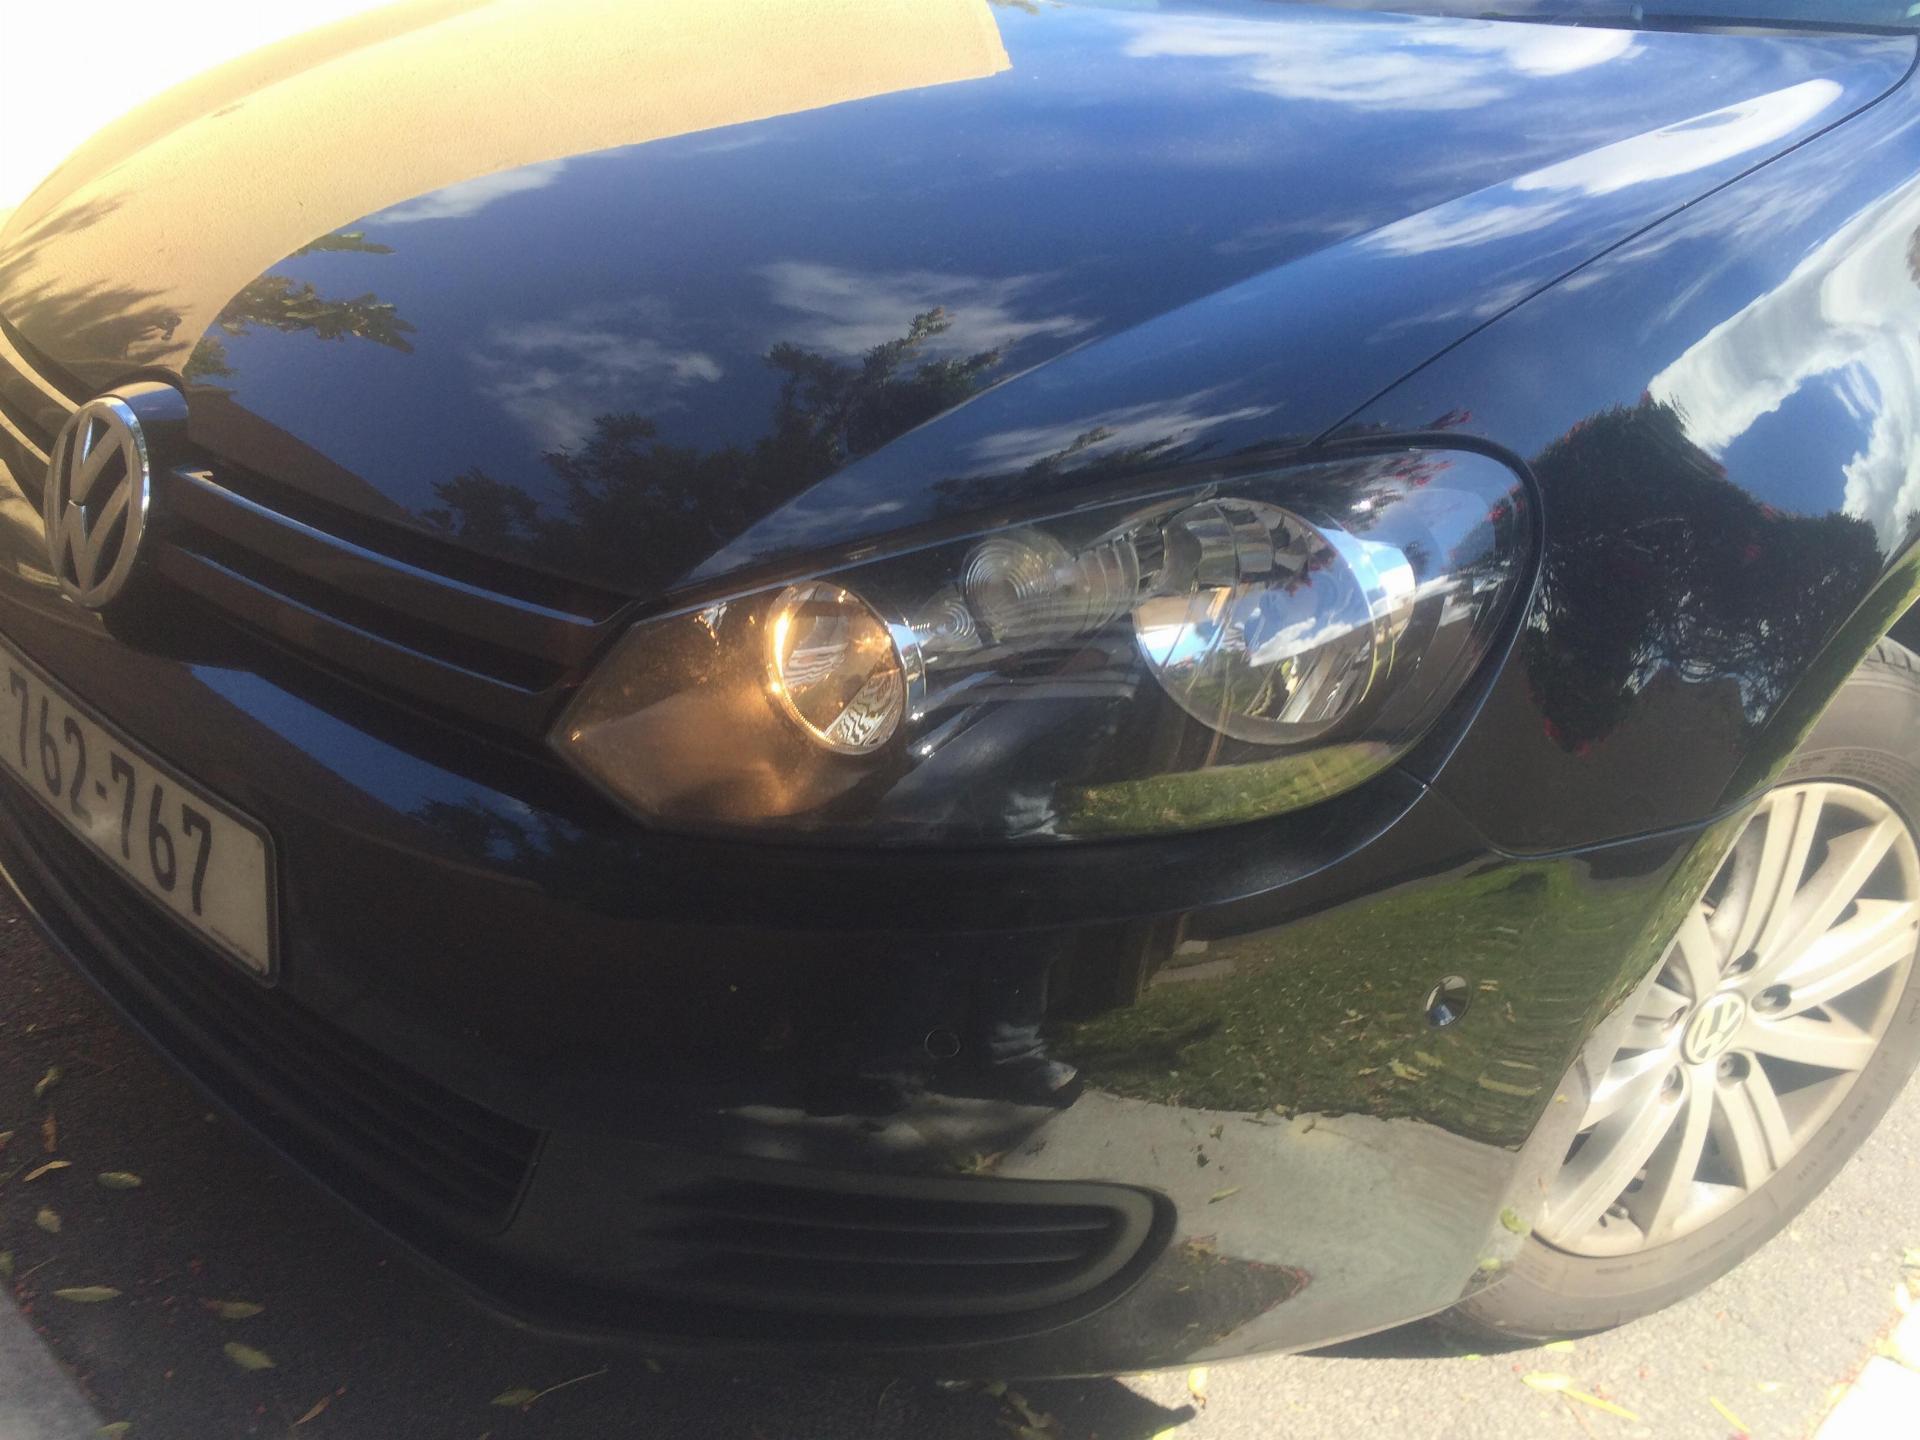 Volkswagen Black Golf 6 1.4 Tsi With Loads OF Extras